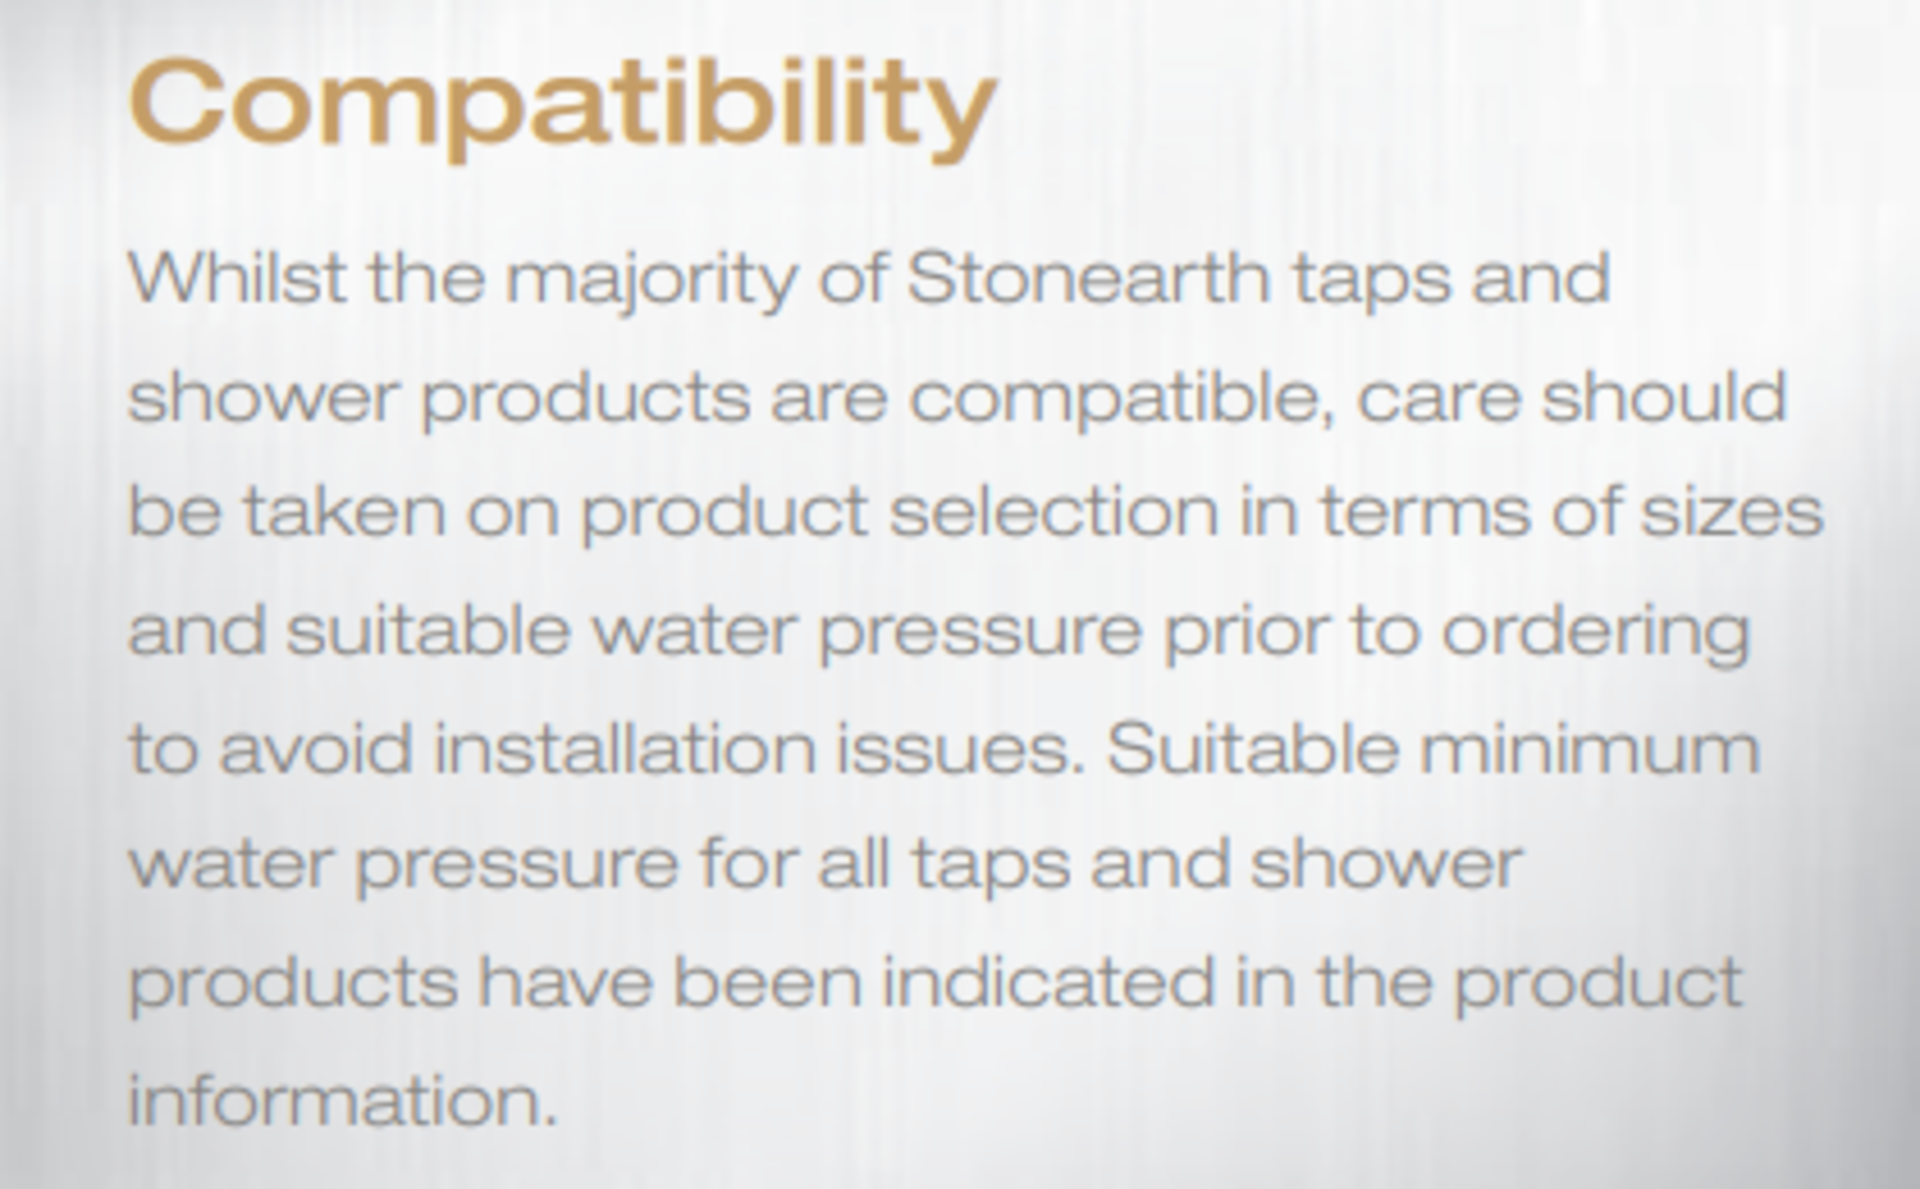 1 x Stonearth Bath Waste Kit With Stainless Steel Covers - Brand New & Boxed - RRP £125 - Ref: TP893 - Image 6 of 10